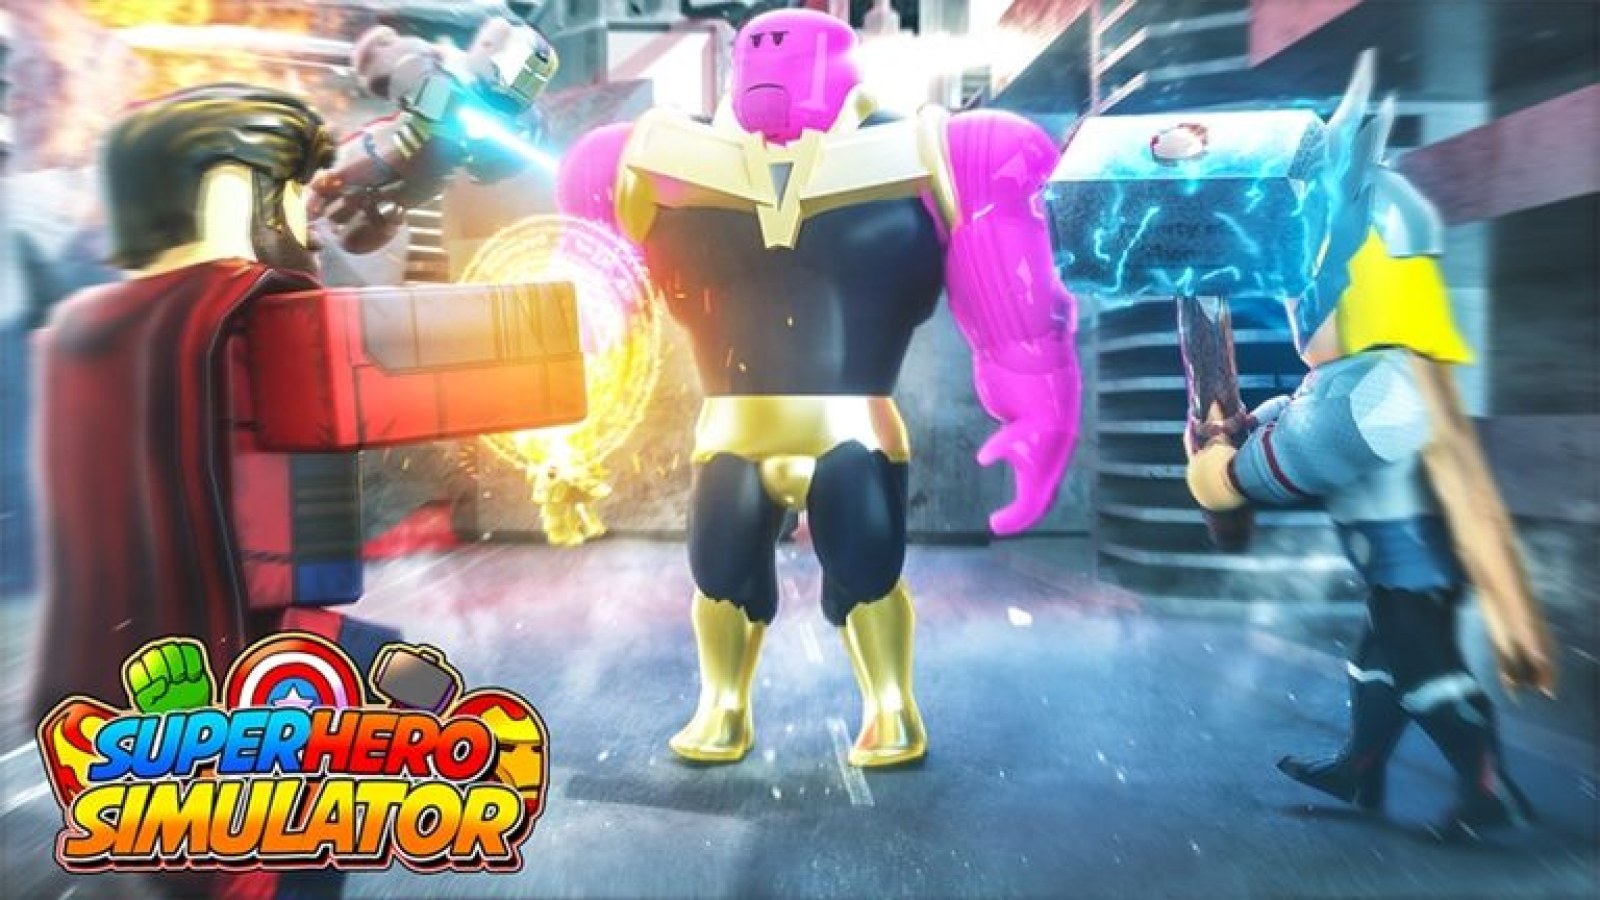 Superhero Simulator Codes All Working Roblox Codes To Get Free Coins - new games new roblox pictures